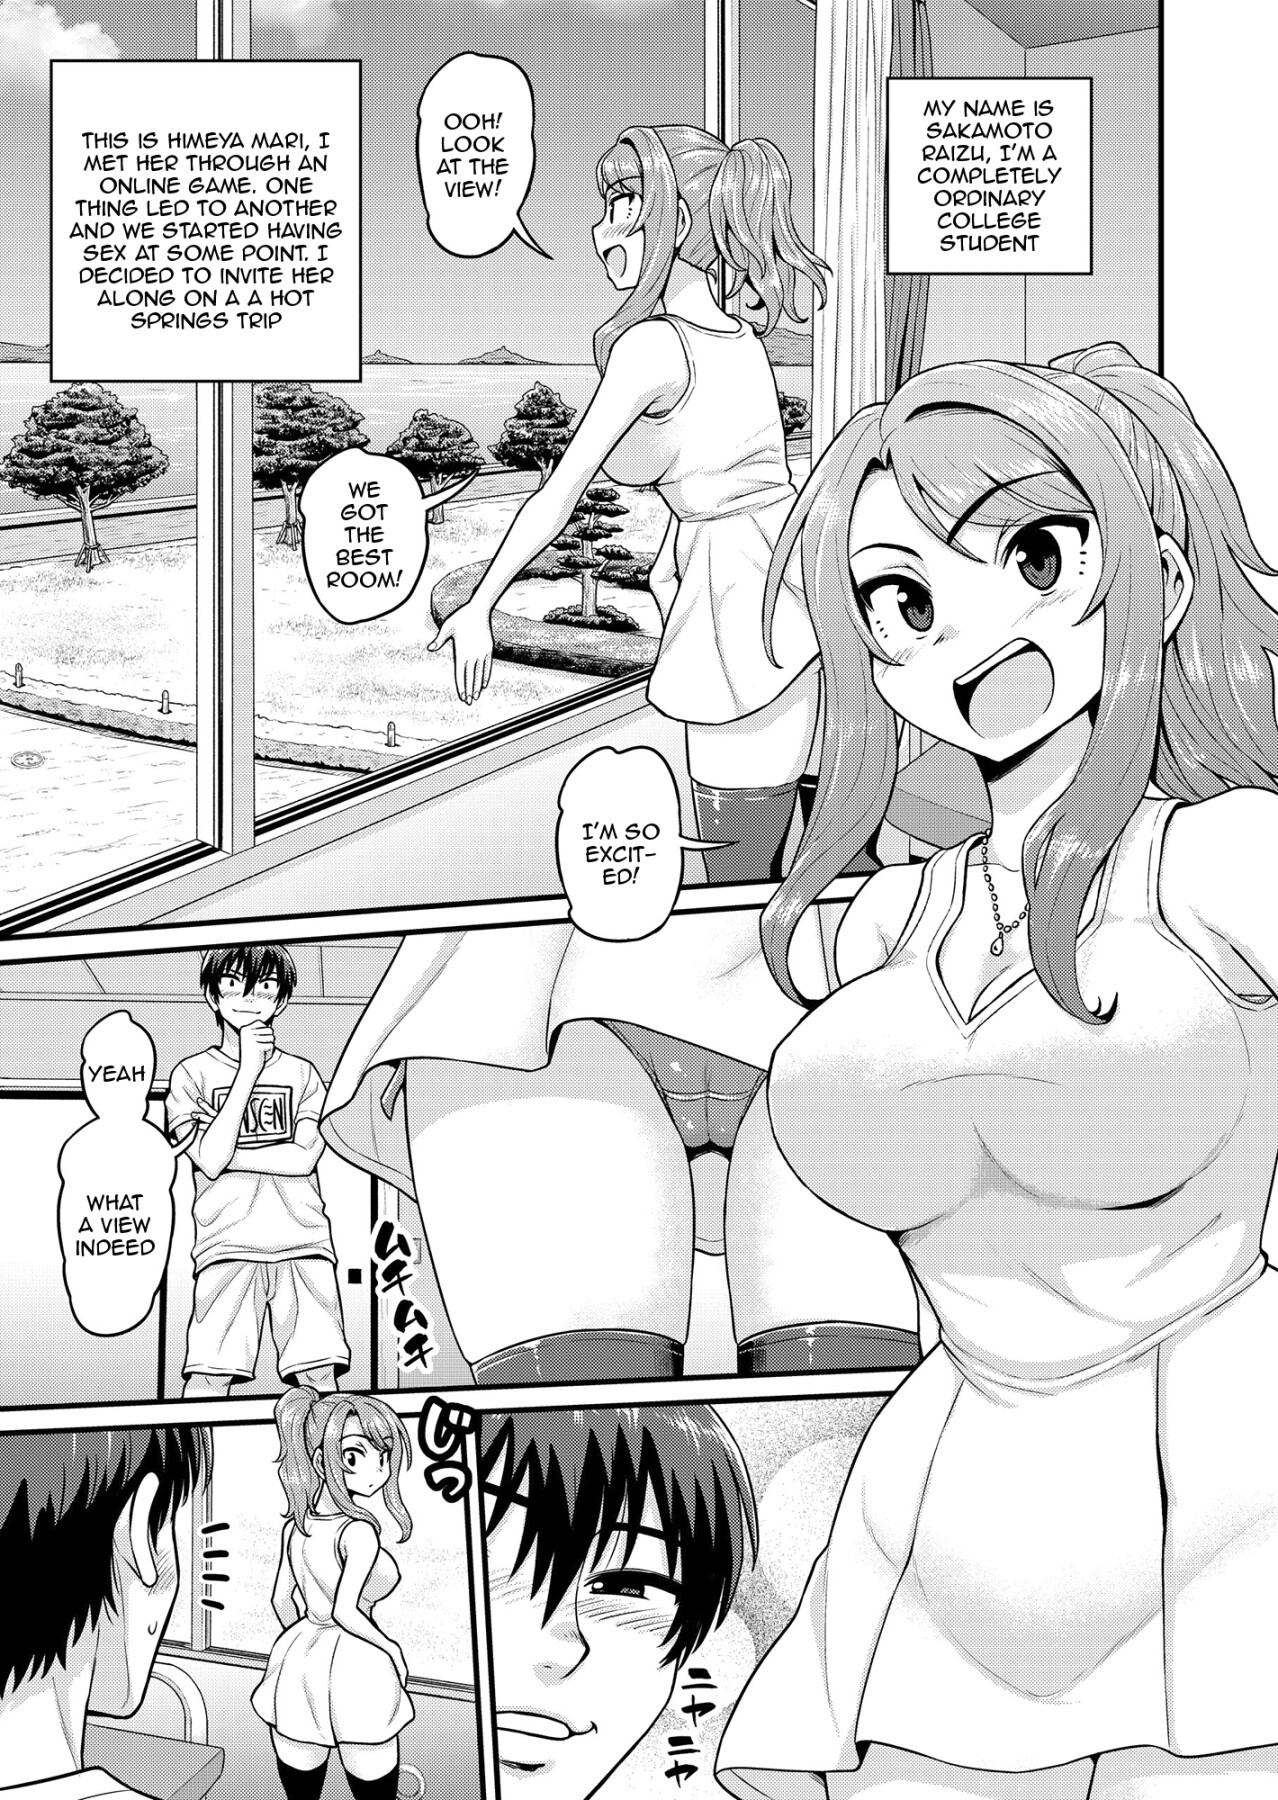 Hentai Manga Comic-A Story About Fucking with A Friend from a Game in a Trip to a Hot Springs Resort-Read-2